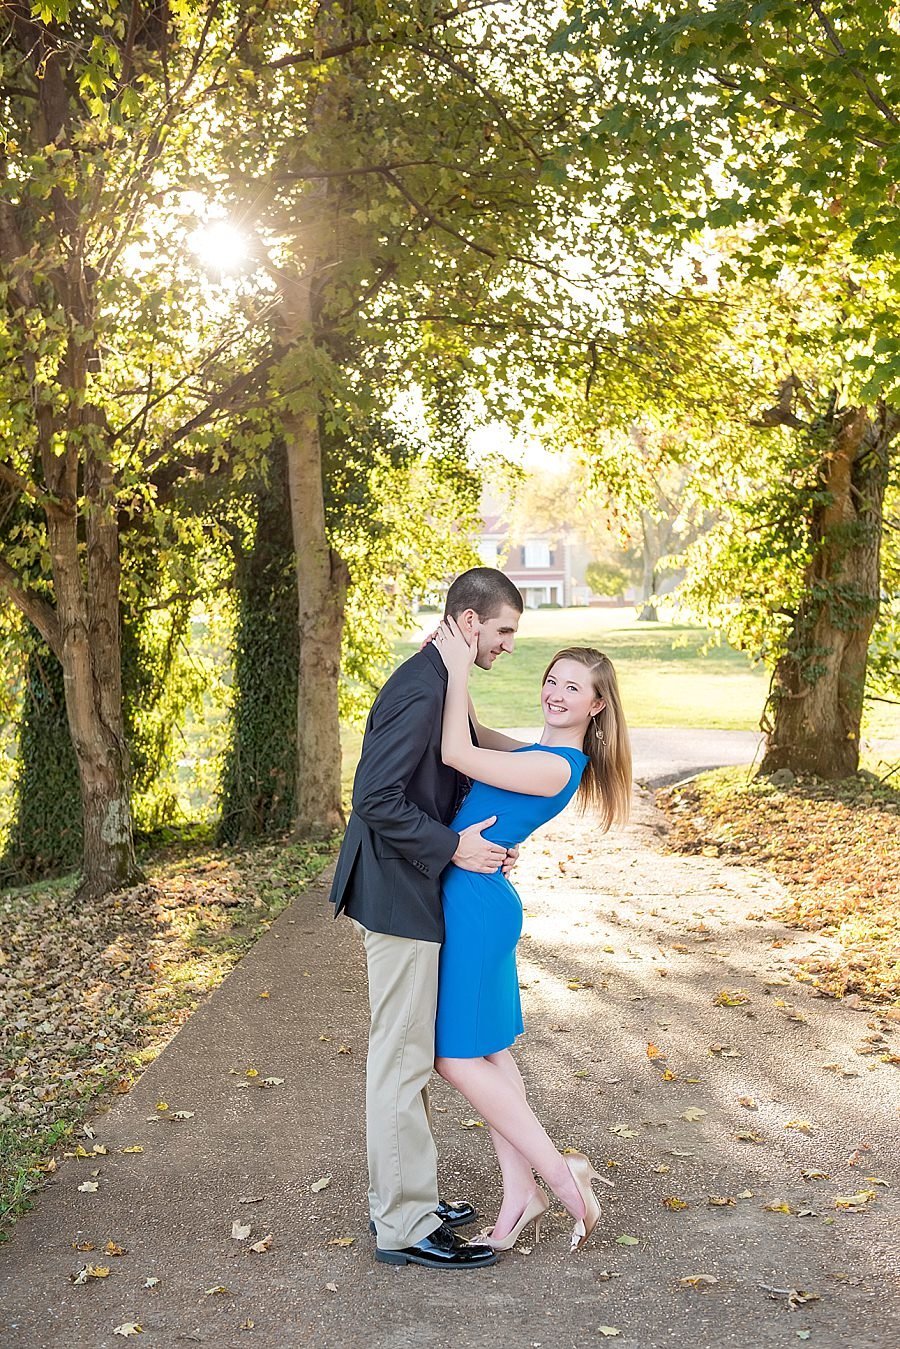 Golden Hour at Smith Park, girl wearing a blue dress and looking at camera while her fiance holds her and smiles down at her